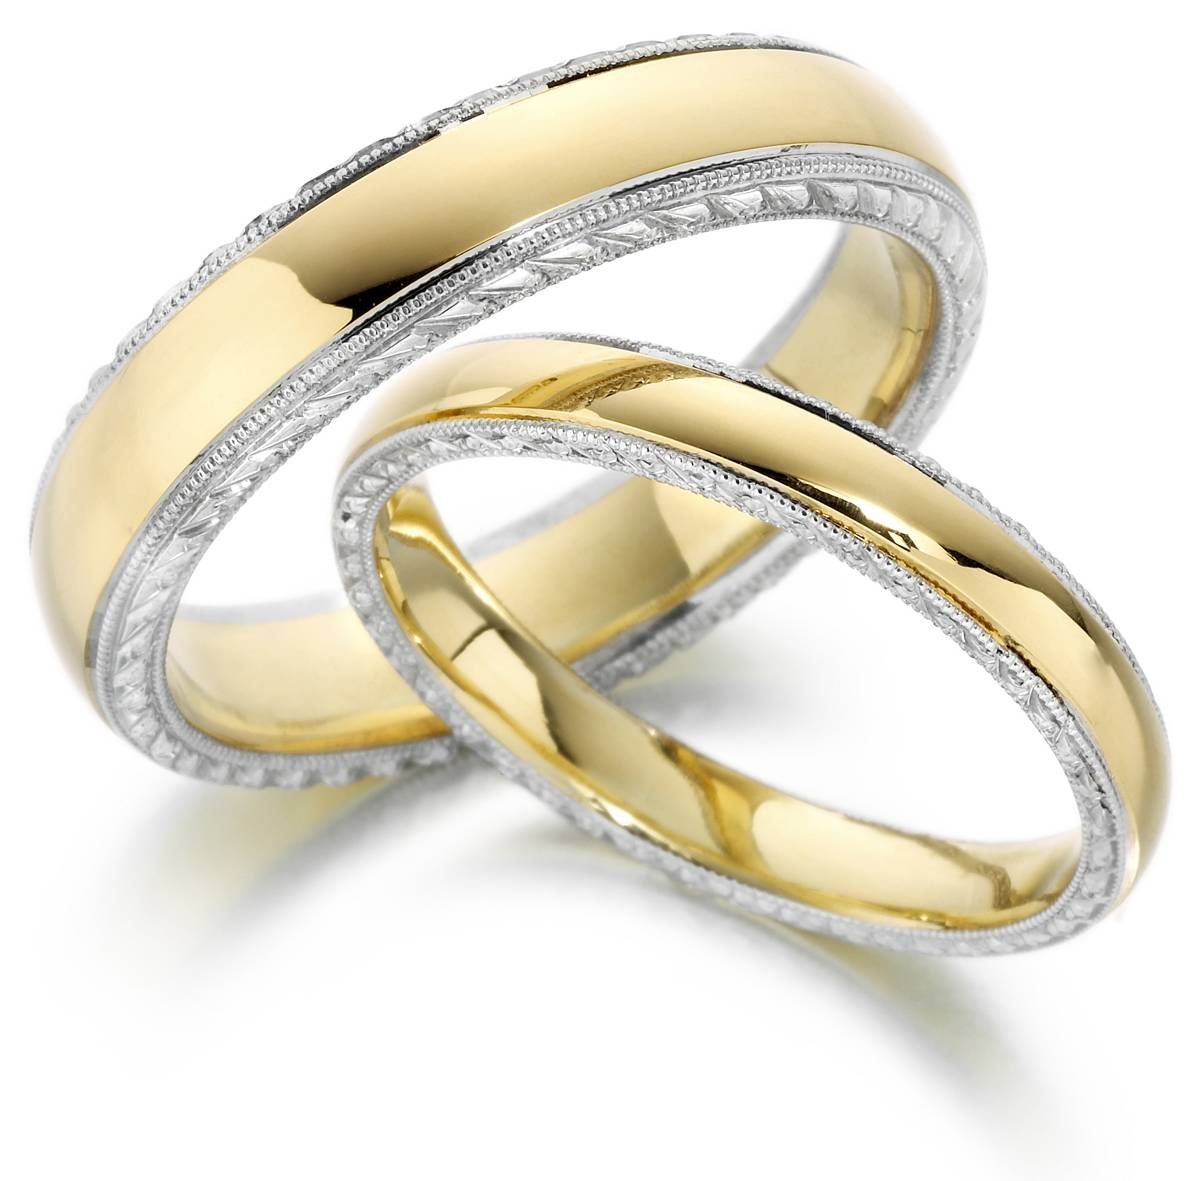 Engagement Rings Archives – Helen Burrell, Goldsmith, Fine Jewellery Inside Engagement Rings Pair (View 1 of 15)